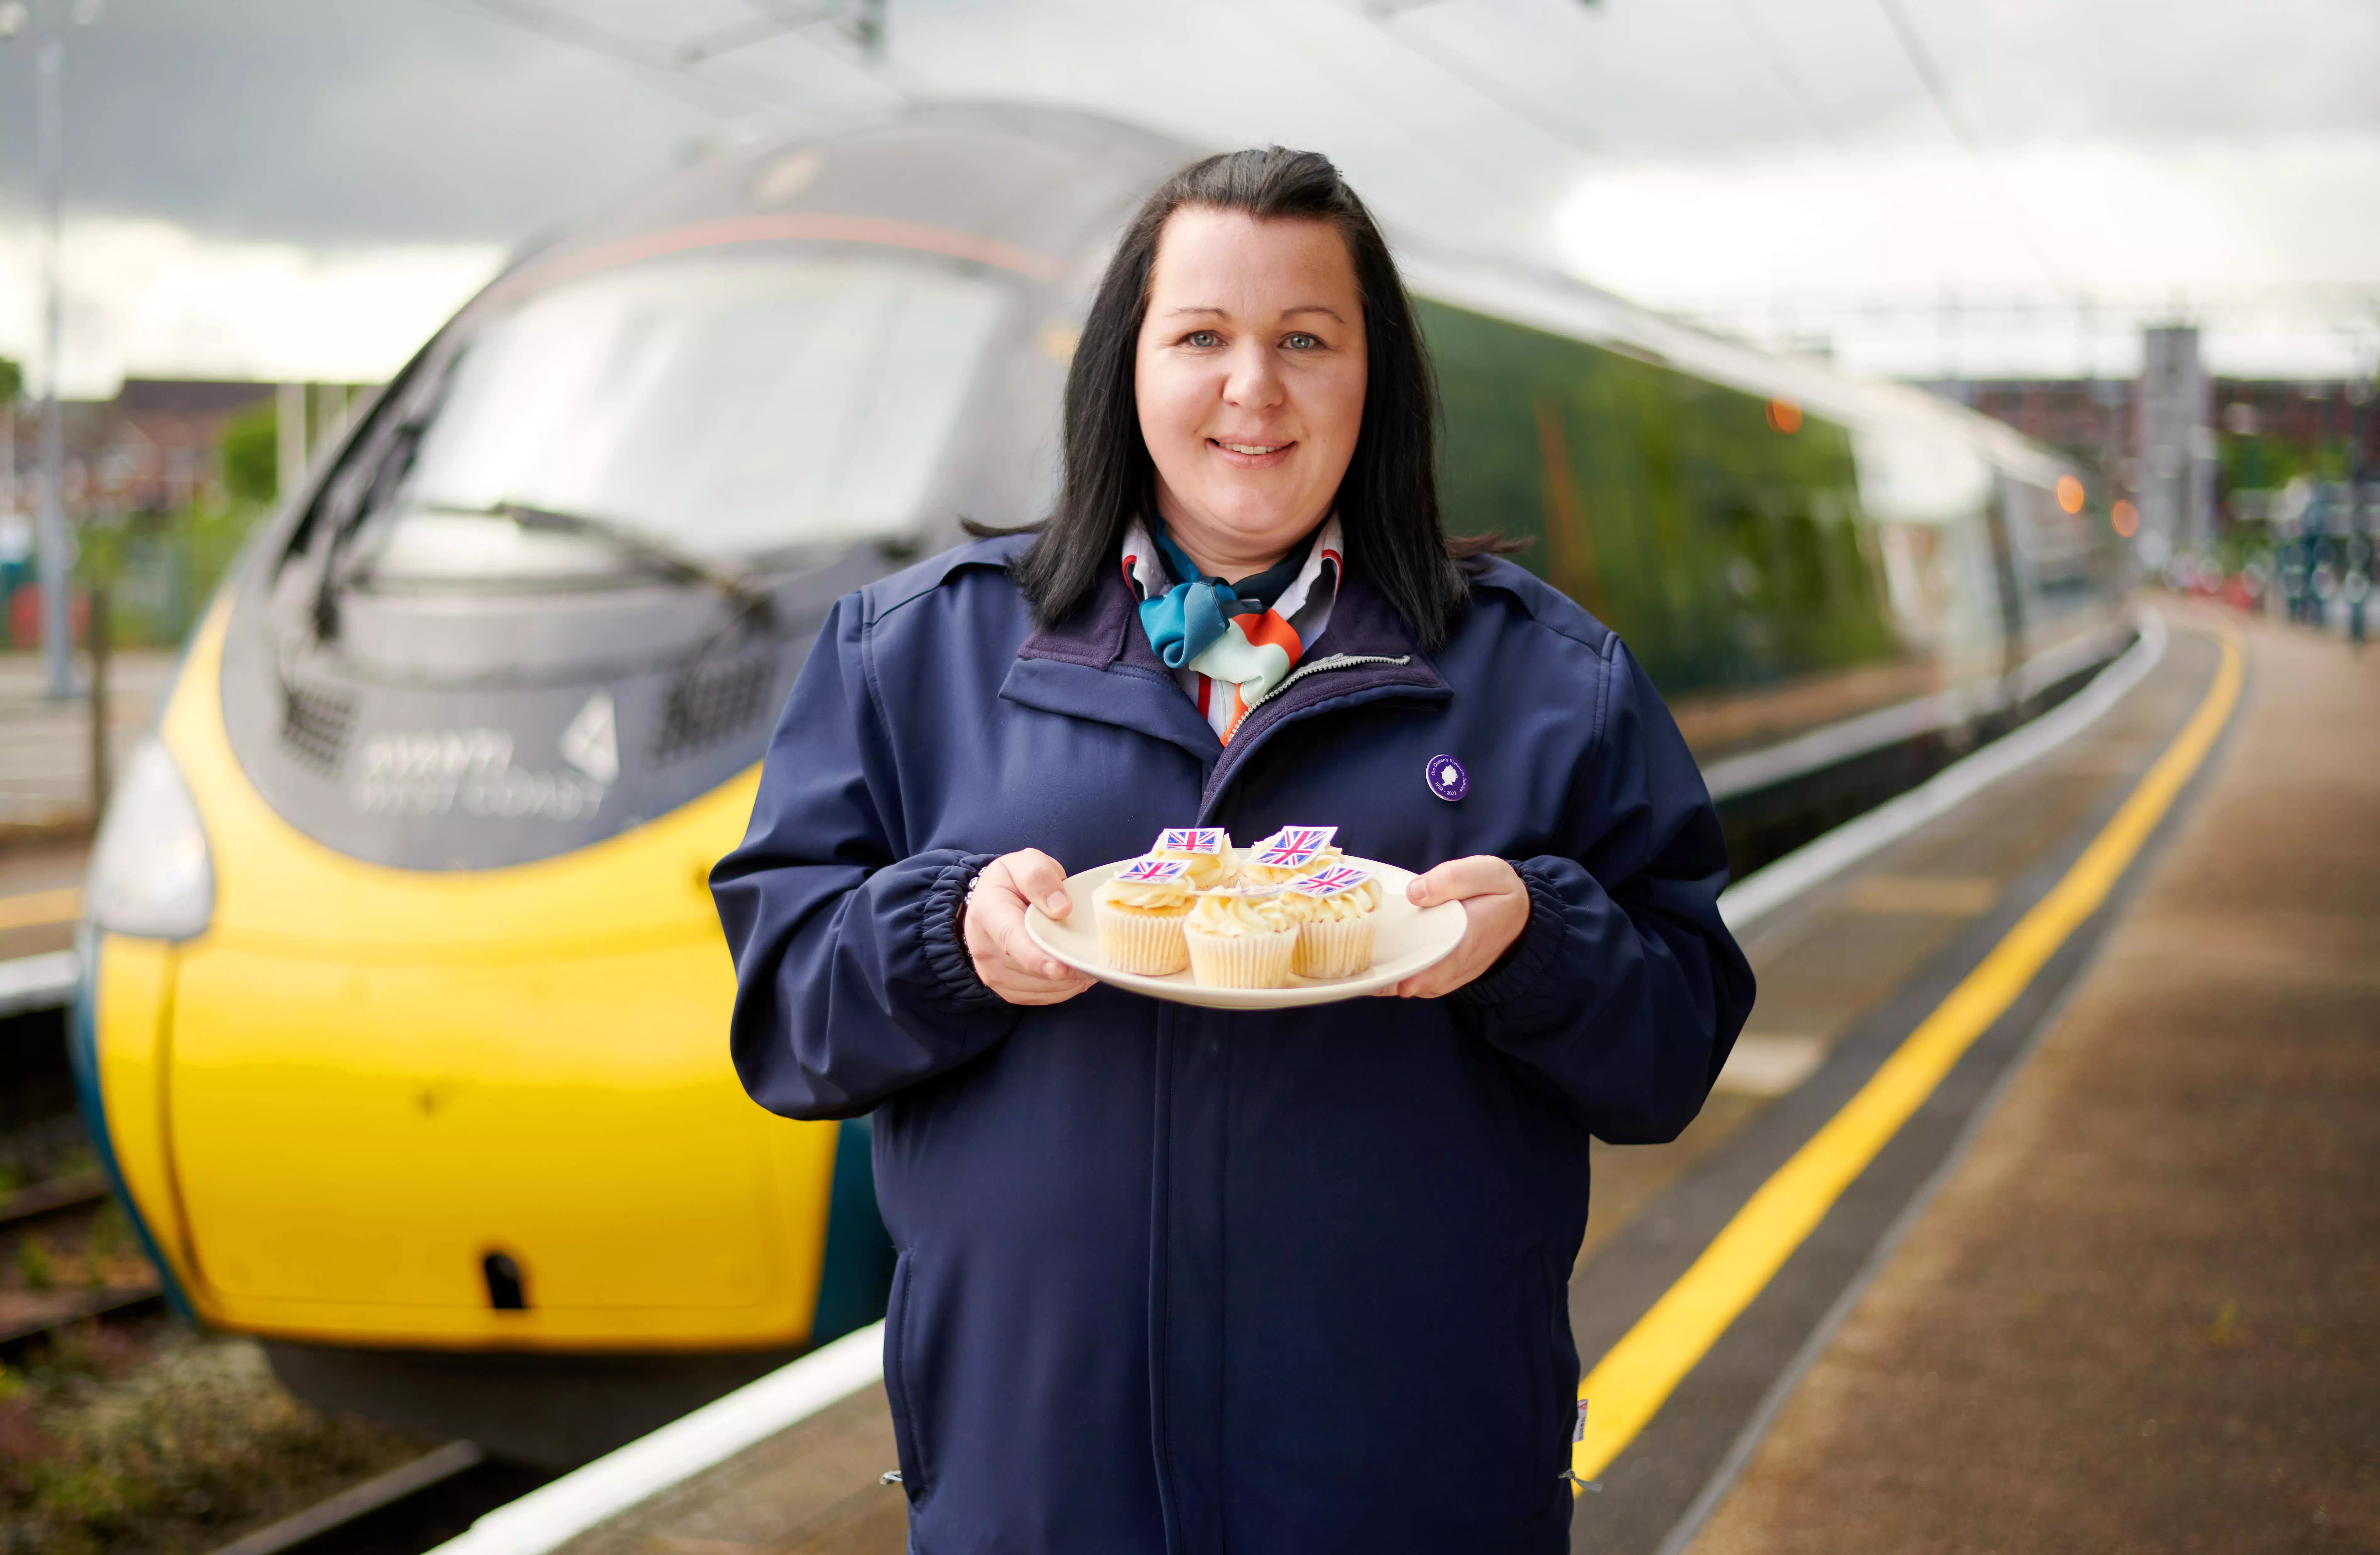 Laura Warwick with cakes for Queen's Jubilee at Runcorn station